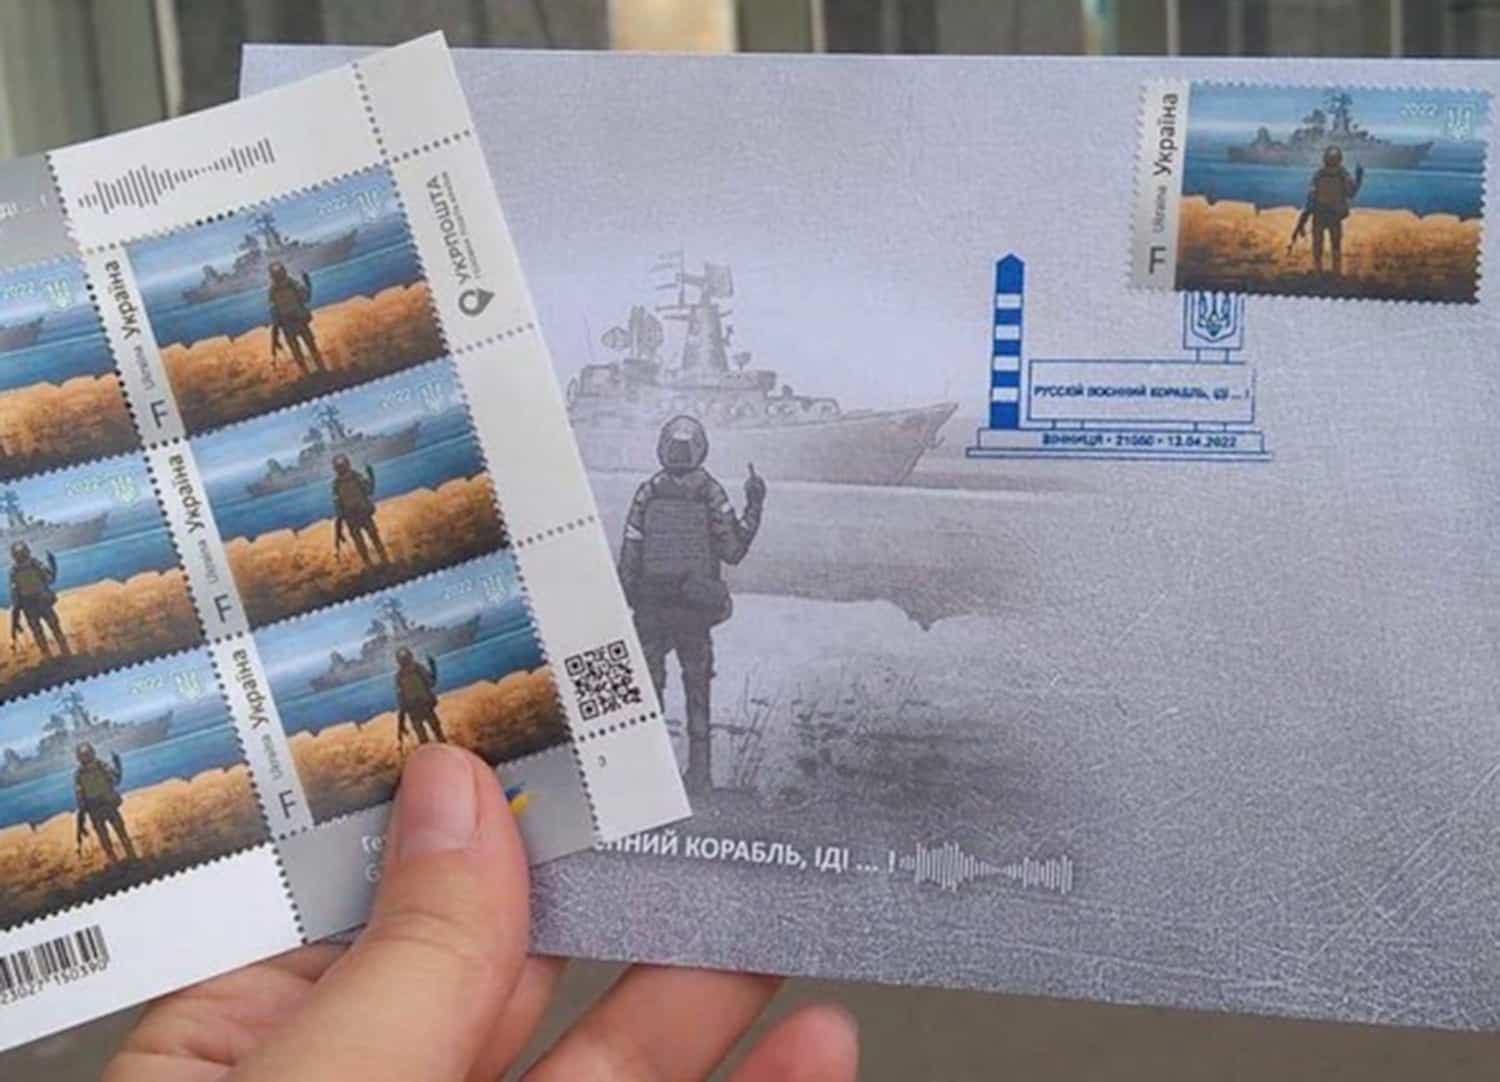 Ukraine post offices put new ‘Russian warship, go f*** yourself’ stamps on sale